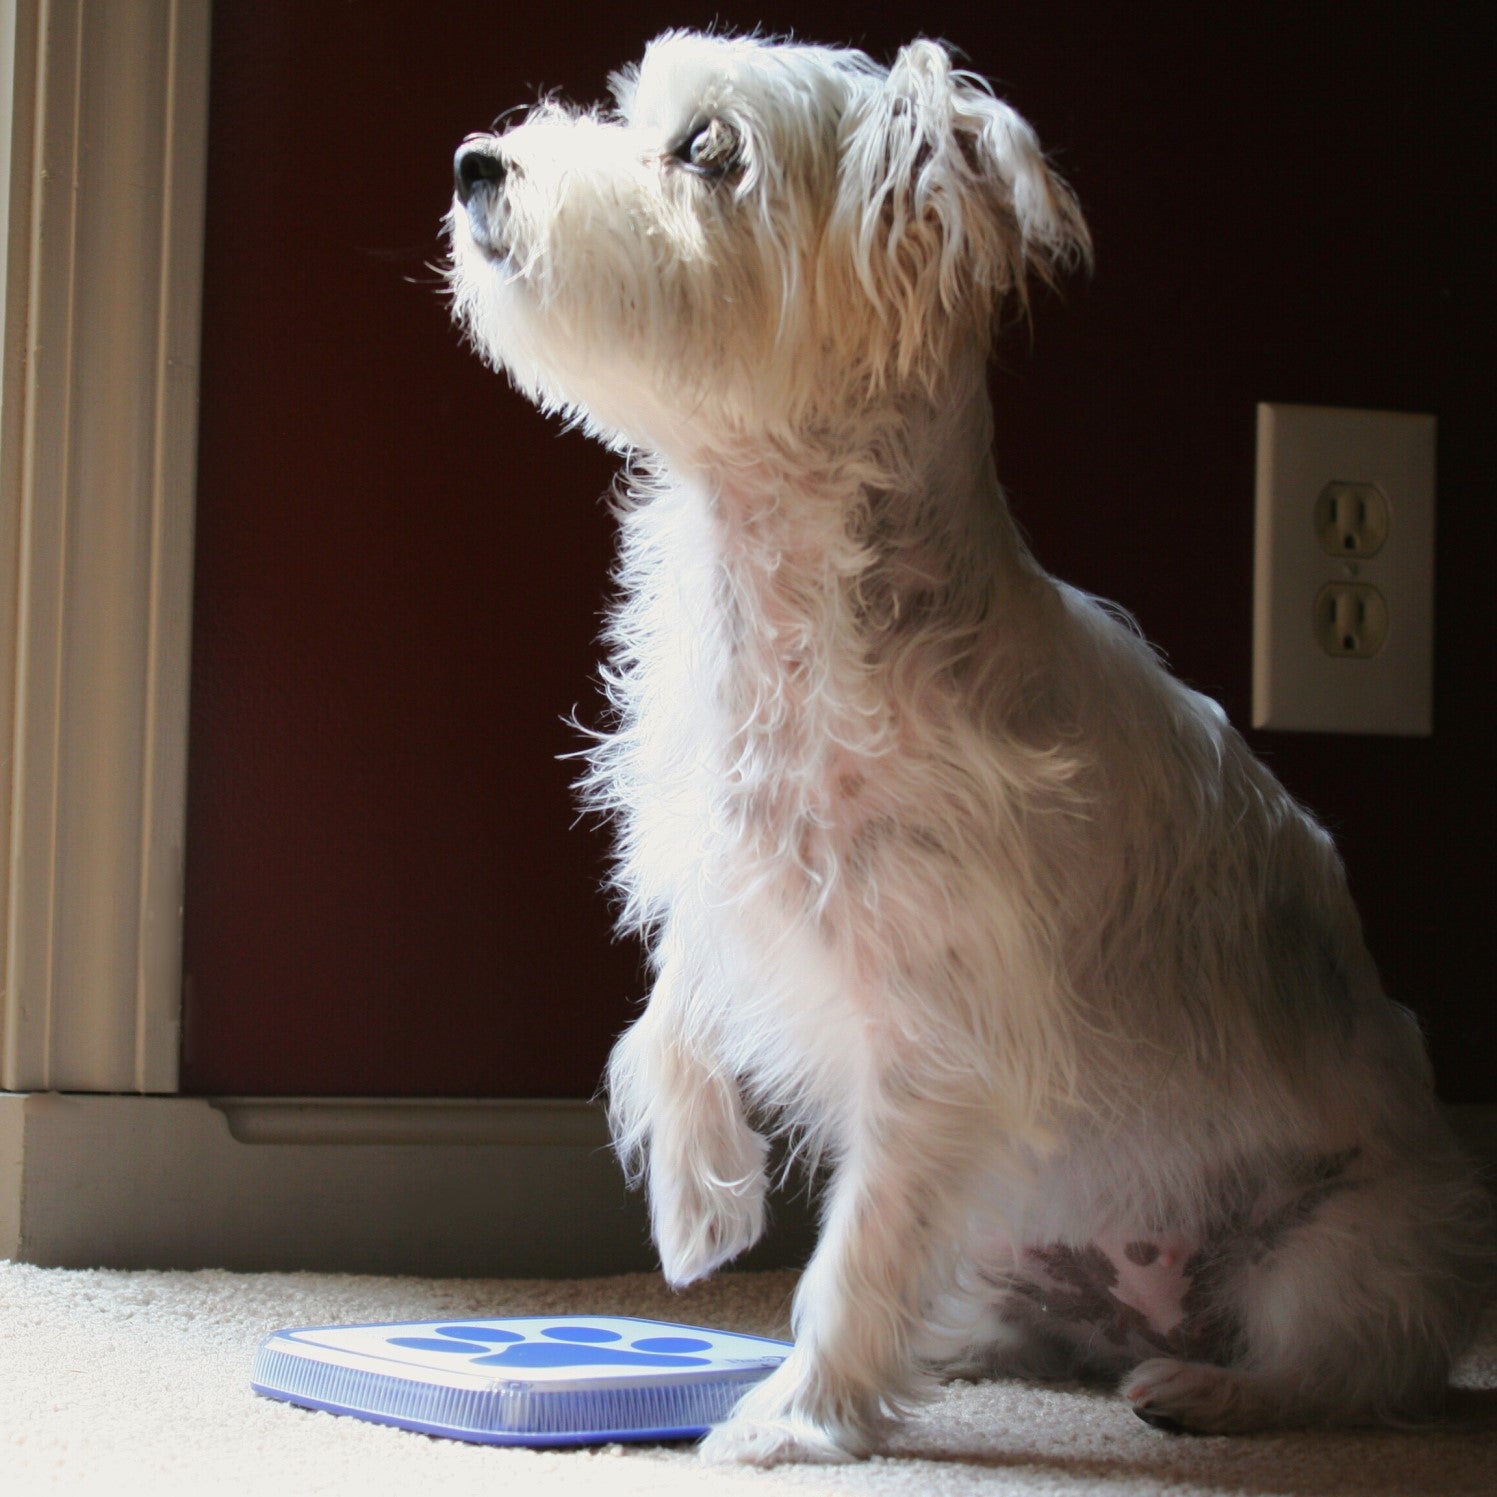 Dog getting ready to touch the Paws2Go device to let their owner know they need to go potty